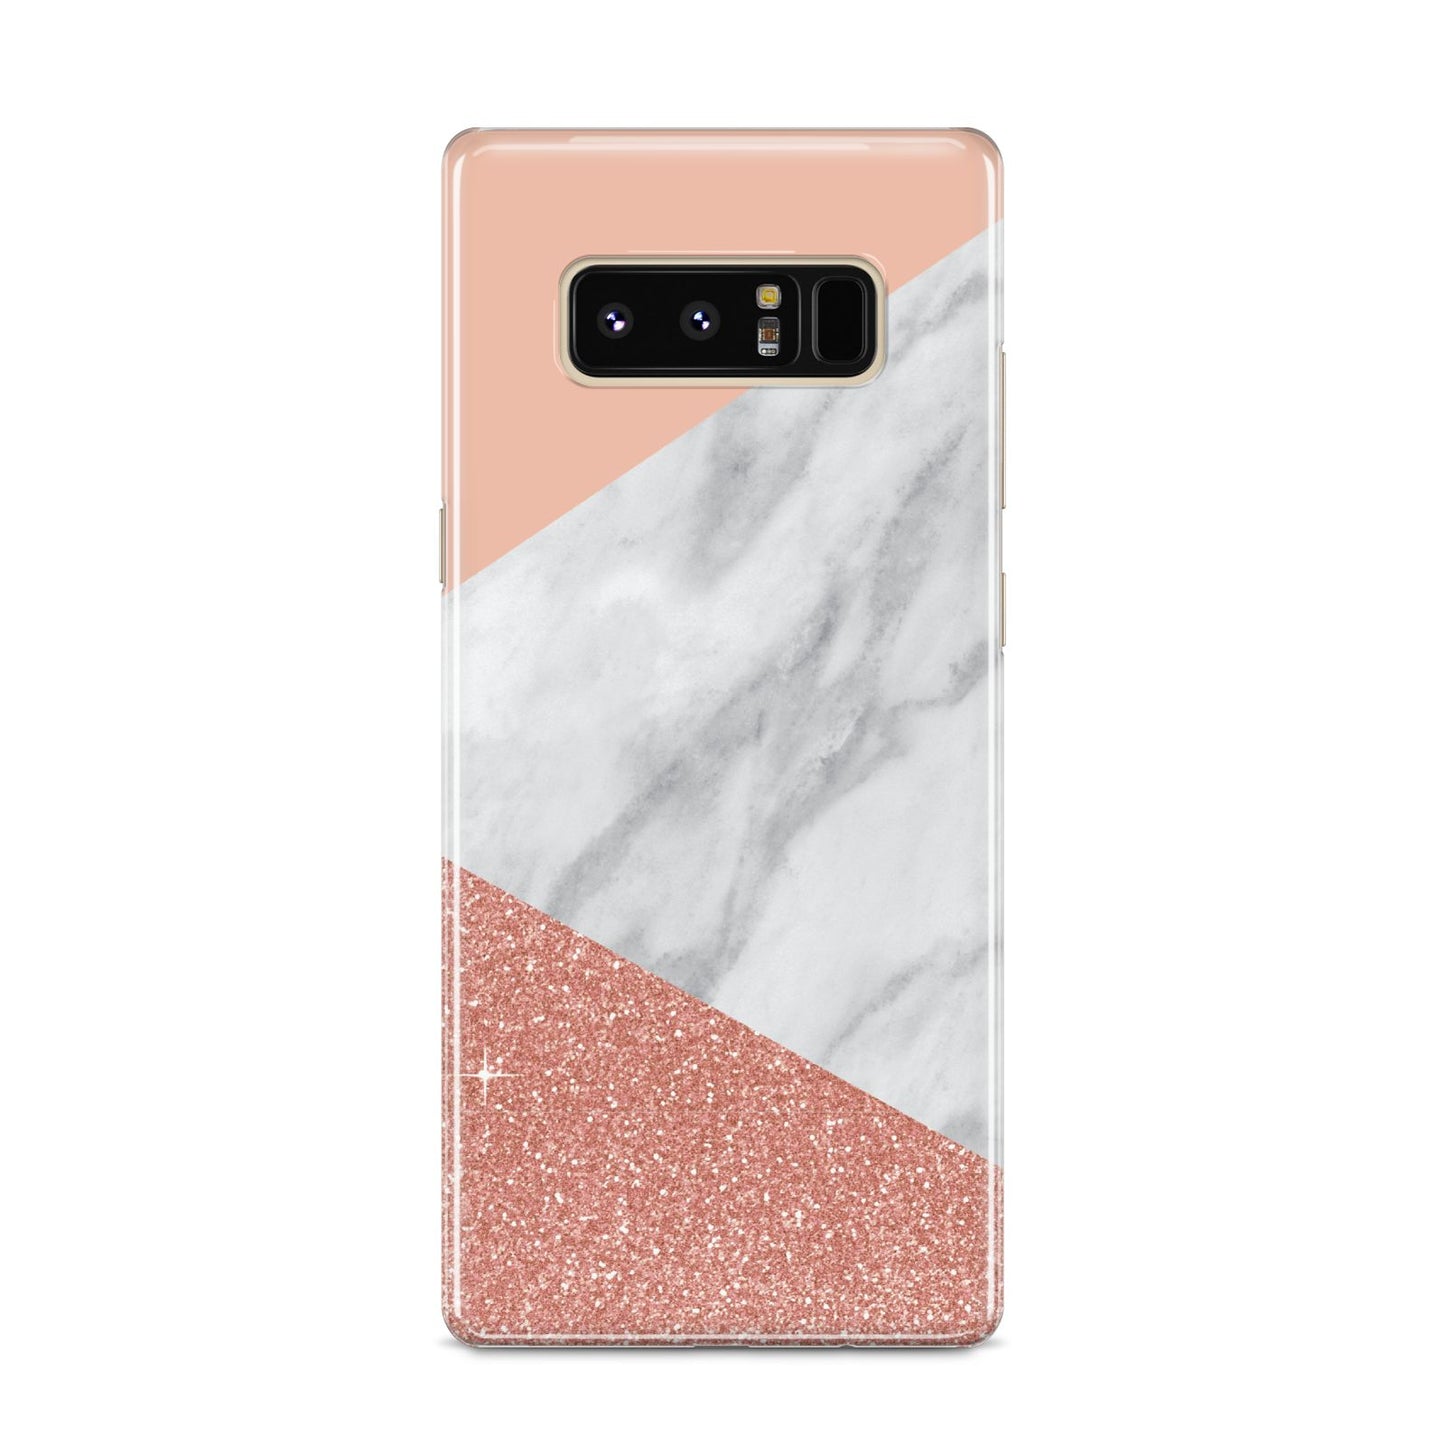 Marble White Rose Gold Samsung Galaxy S8 Case